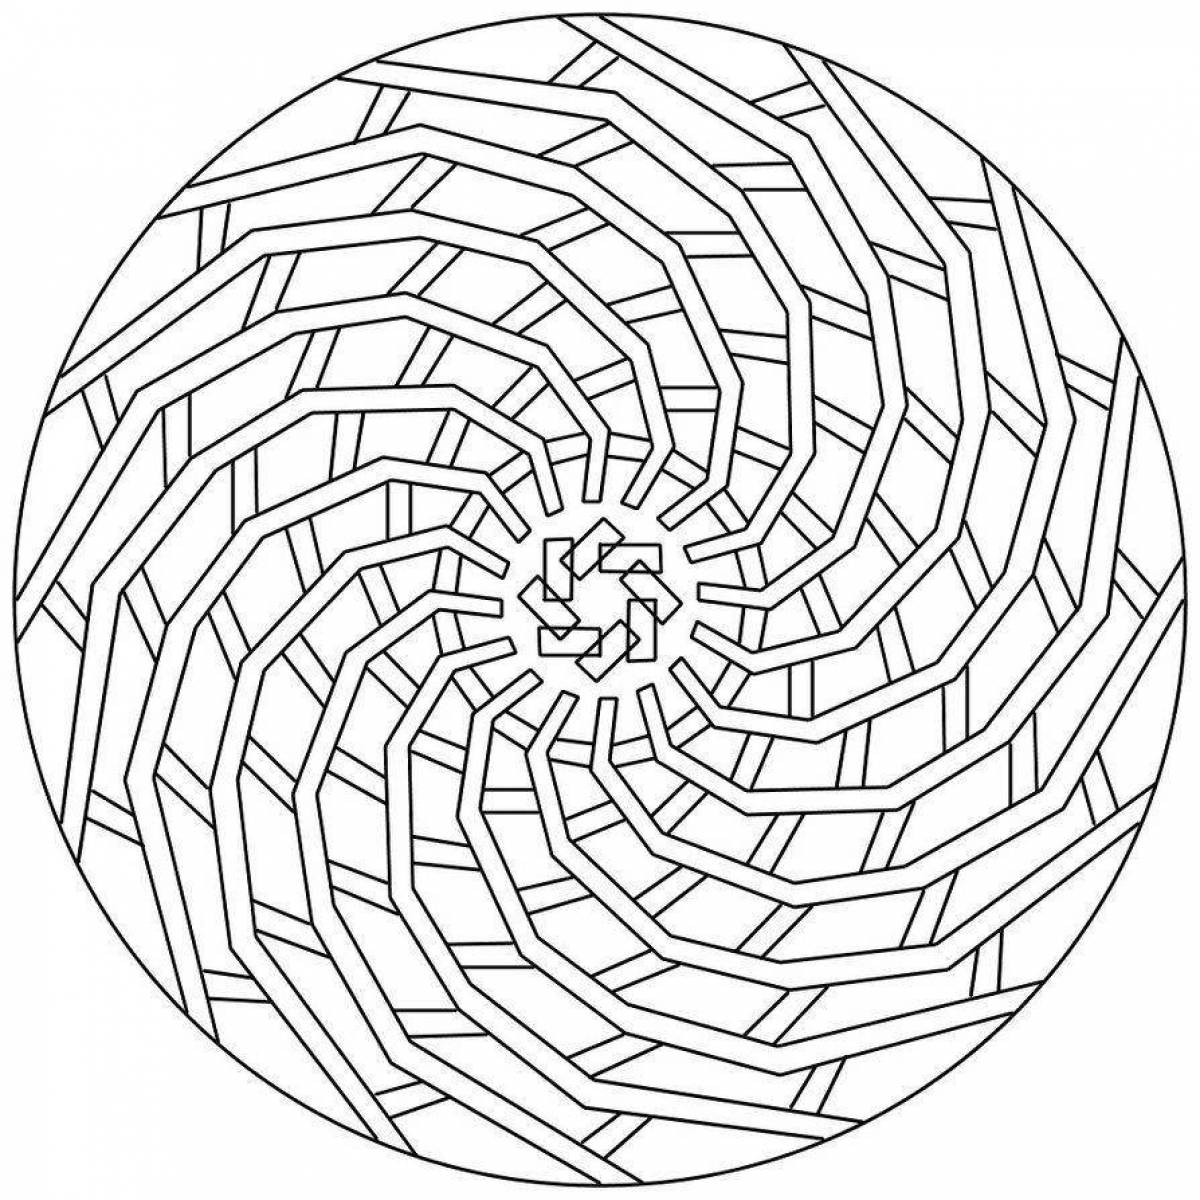 Majestic striped circle coloring page